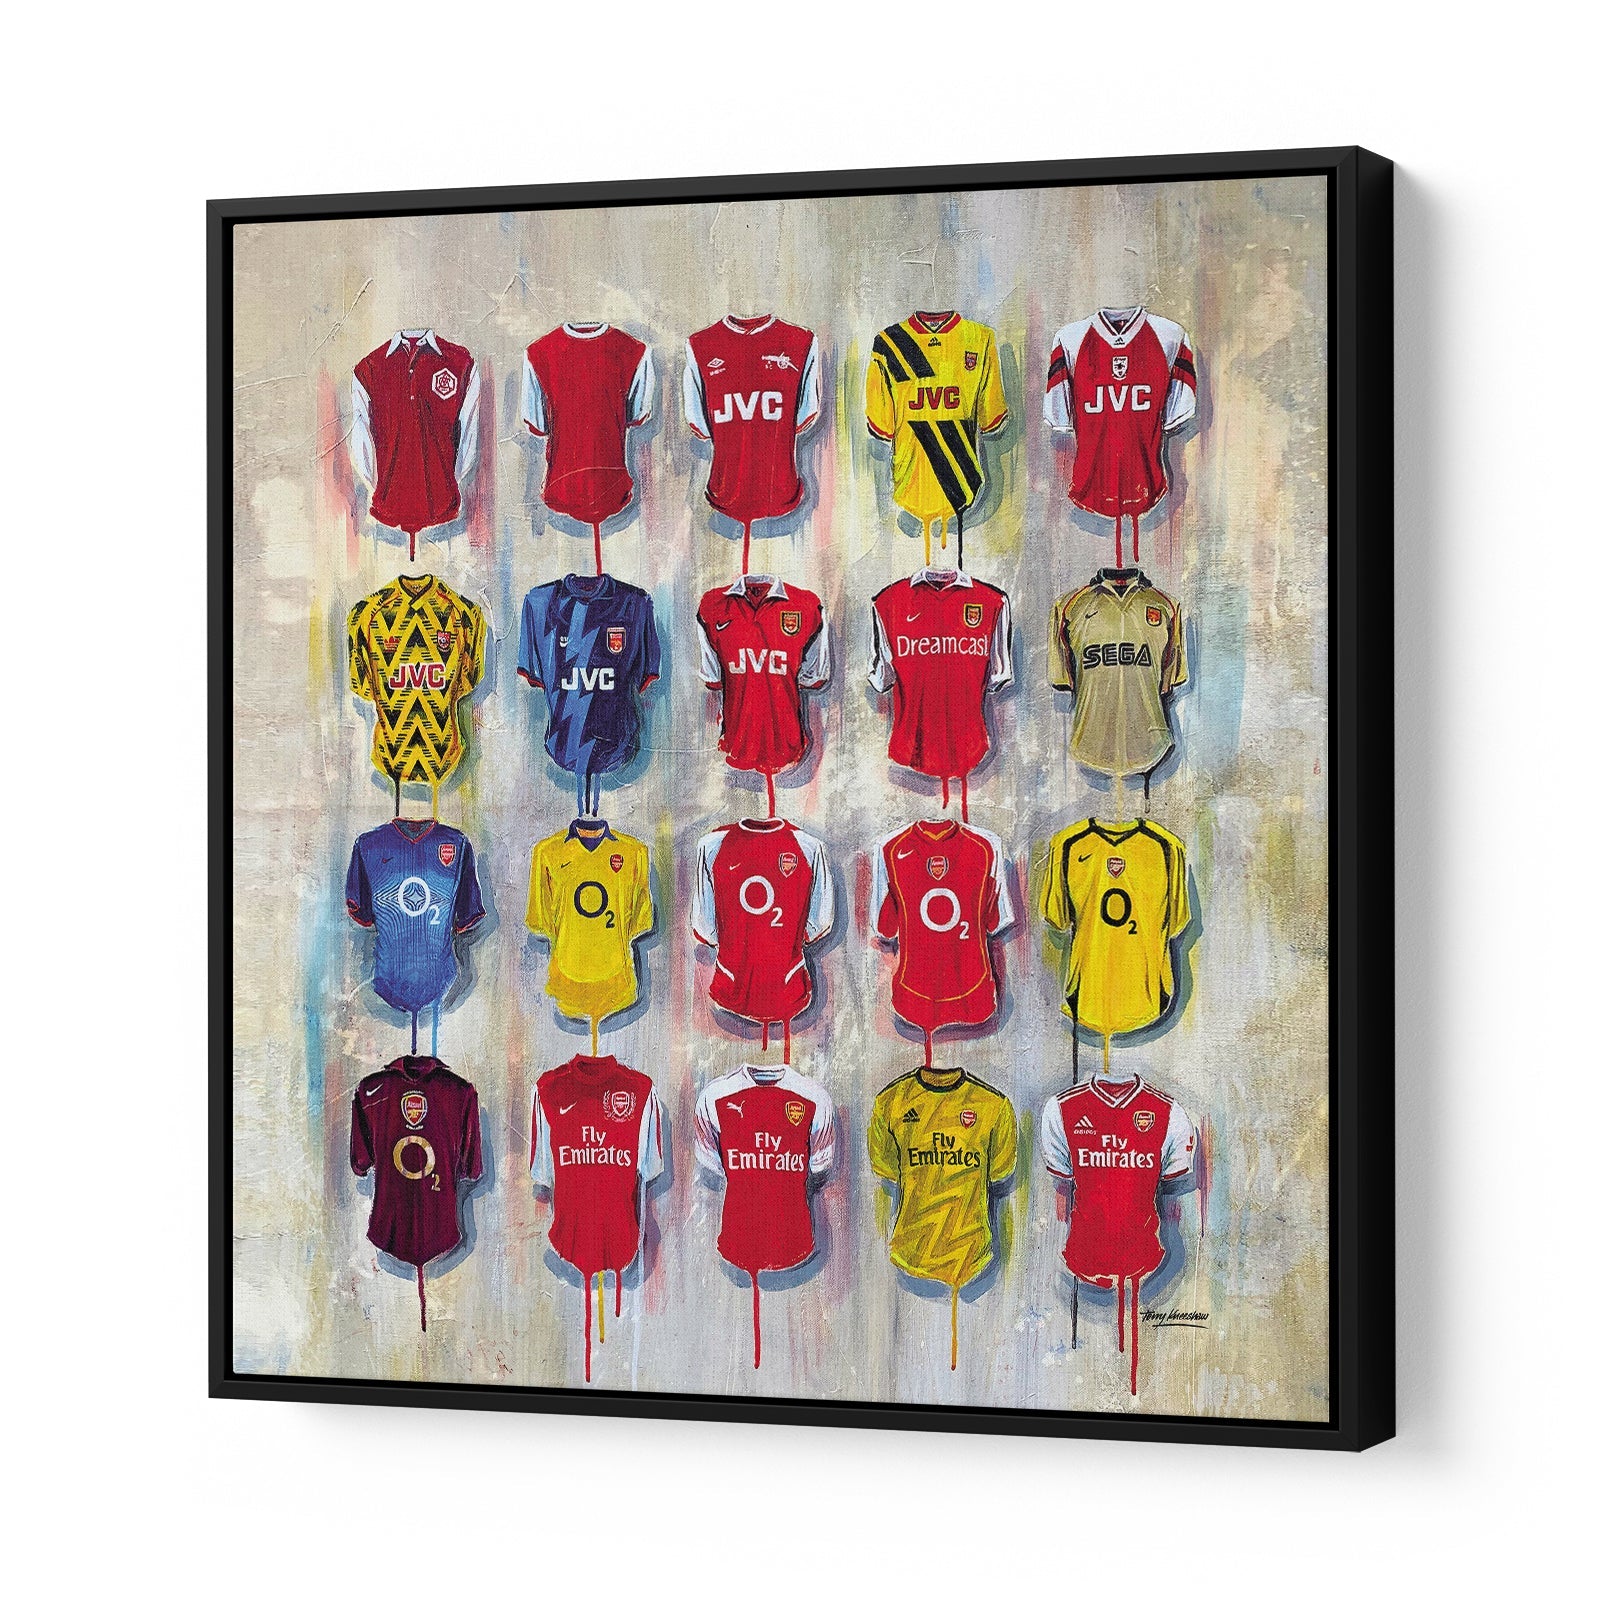 Arsenal Gunners Canvases by Terry Kneeshaw are a collection of striking artworks that come in a variety of sizes, including 20x20, 30x30, and 40x40. Each canvas is available in either a framed or unframed black floating frame. The artwork features a visually dynamic abstract composition with bold, bright colors and textures that pay homage to the iconic Arsenal Gunners team. Perfect for any Arsenal fan, these canvases are a great addition to any room and are sure to impress.